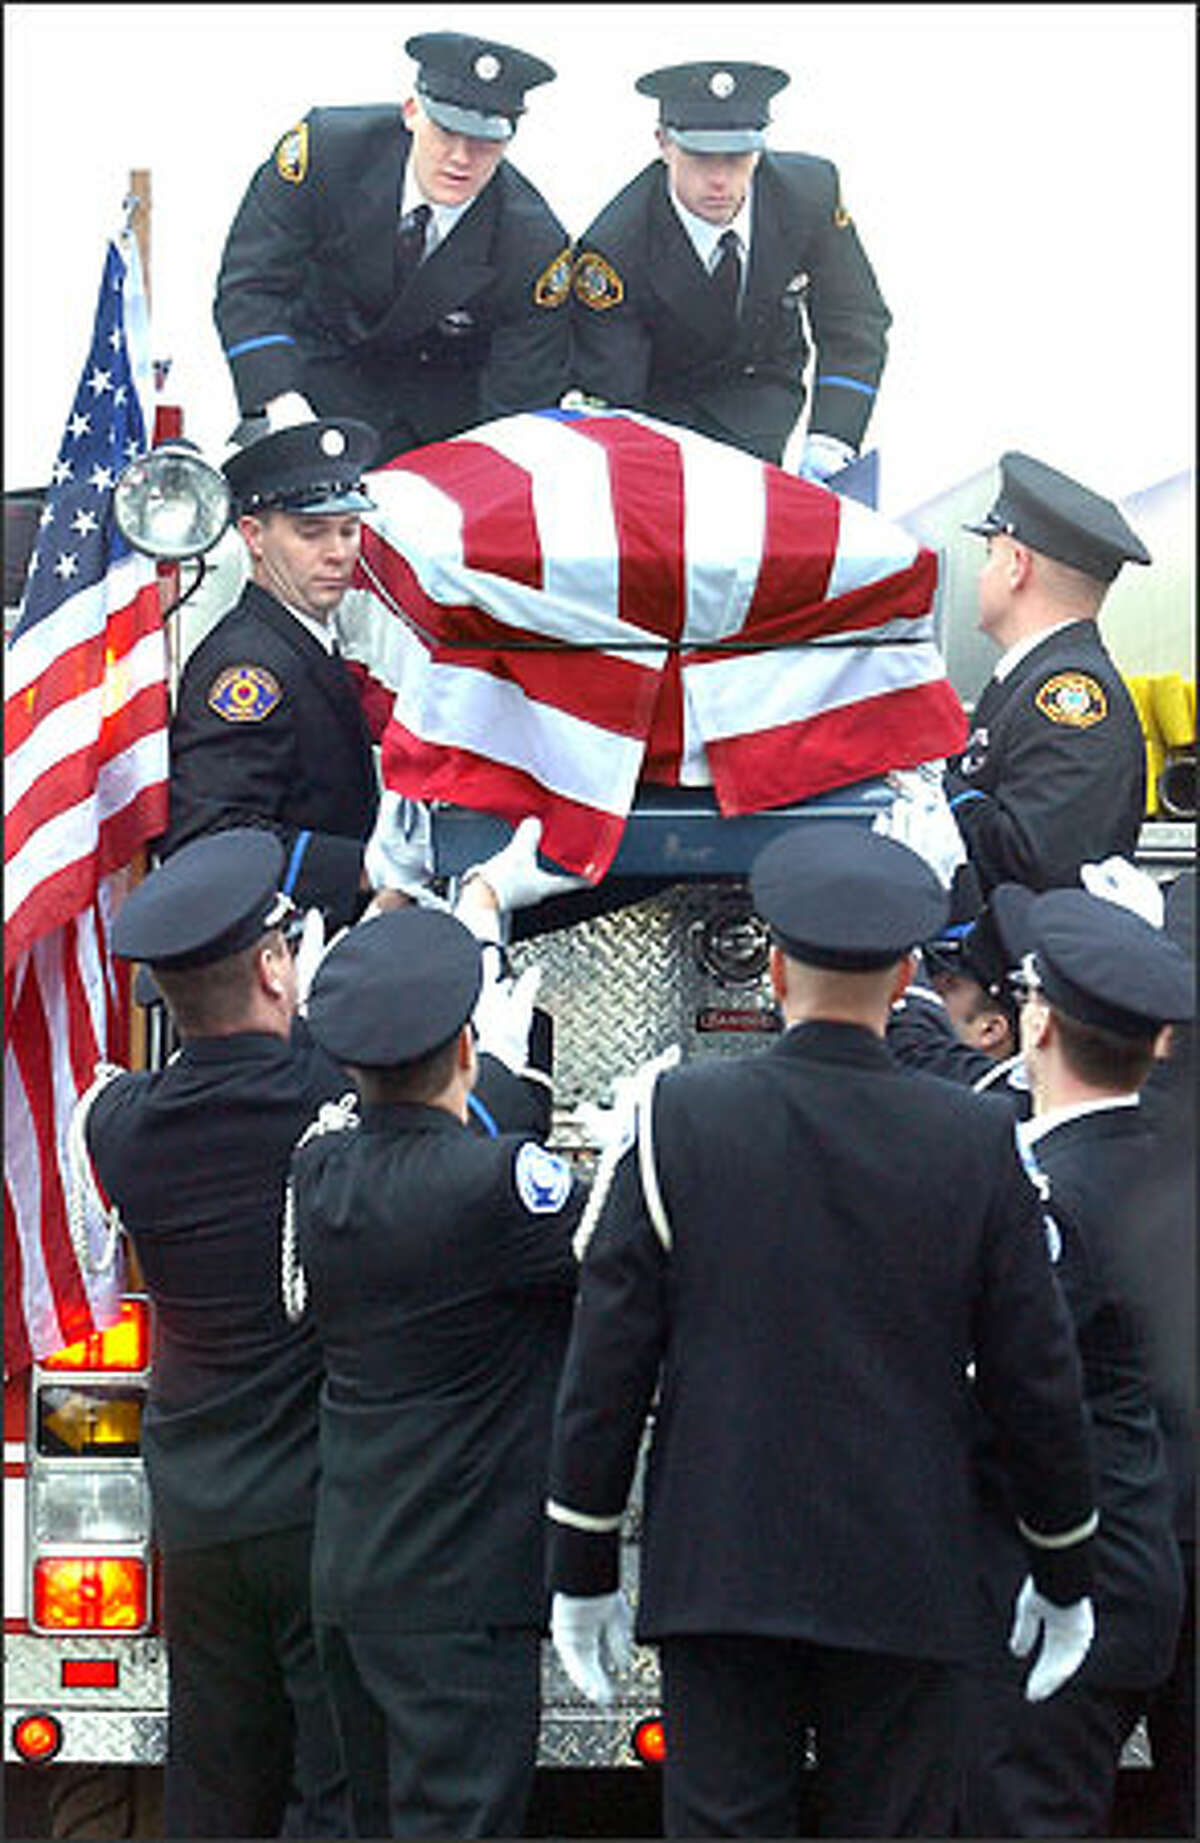 The flag-drapped casket of Thad Dahl is lowered by his fellow Vashon Island firefighters as hundreds of friends and family turned out for Dahl's funeral mass held at St. Charles Church in Burlington, Wash.